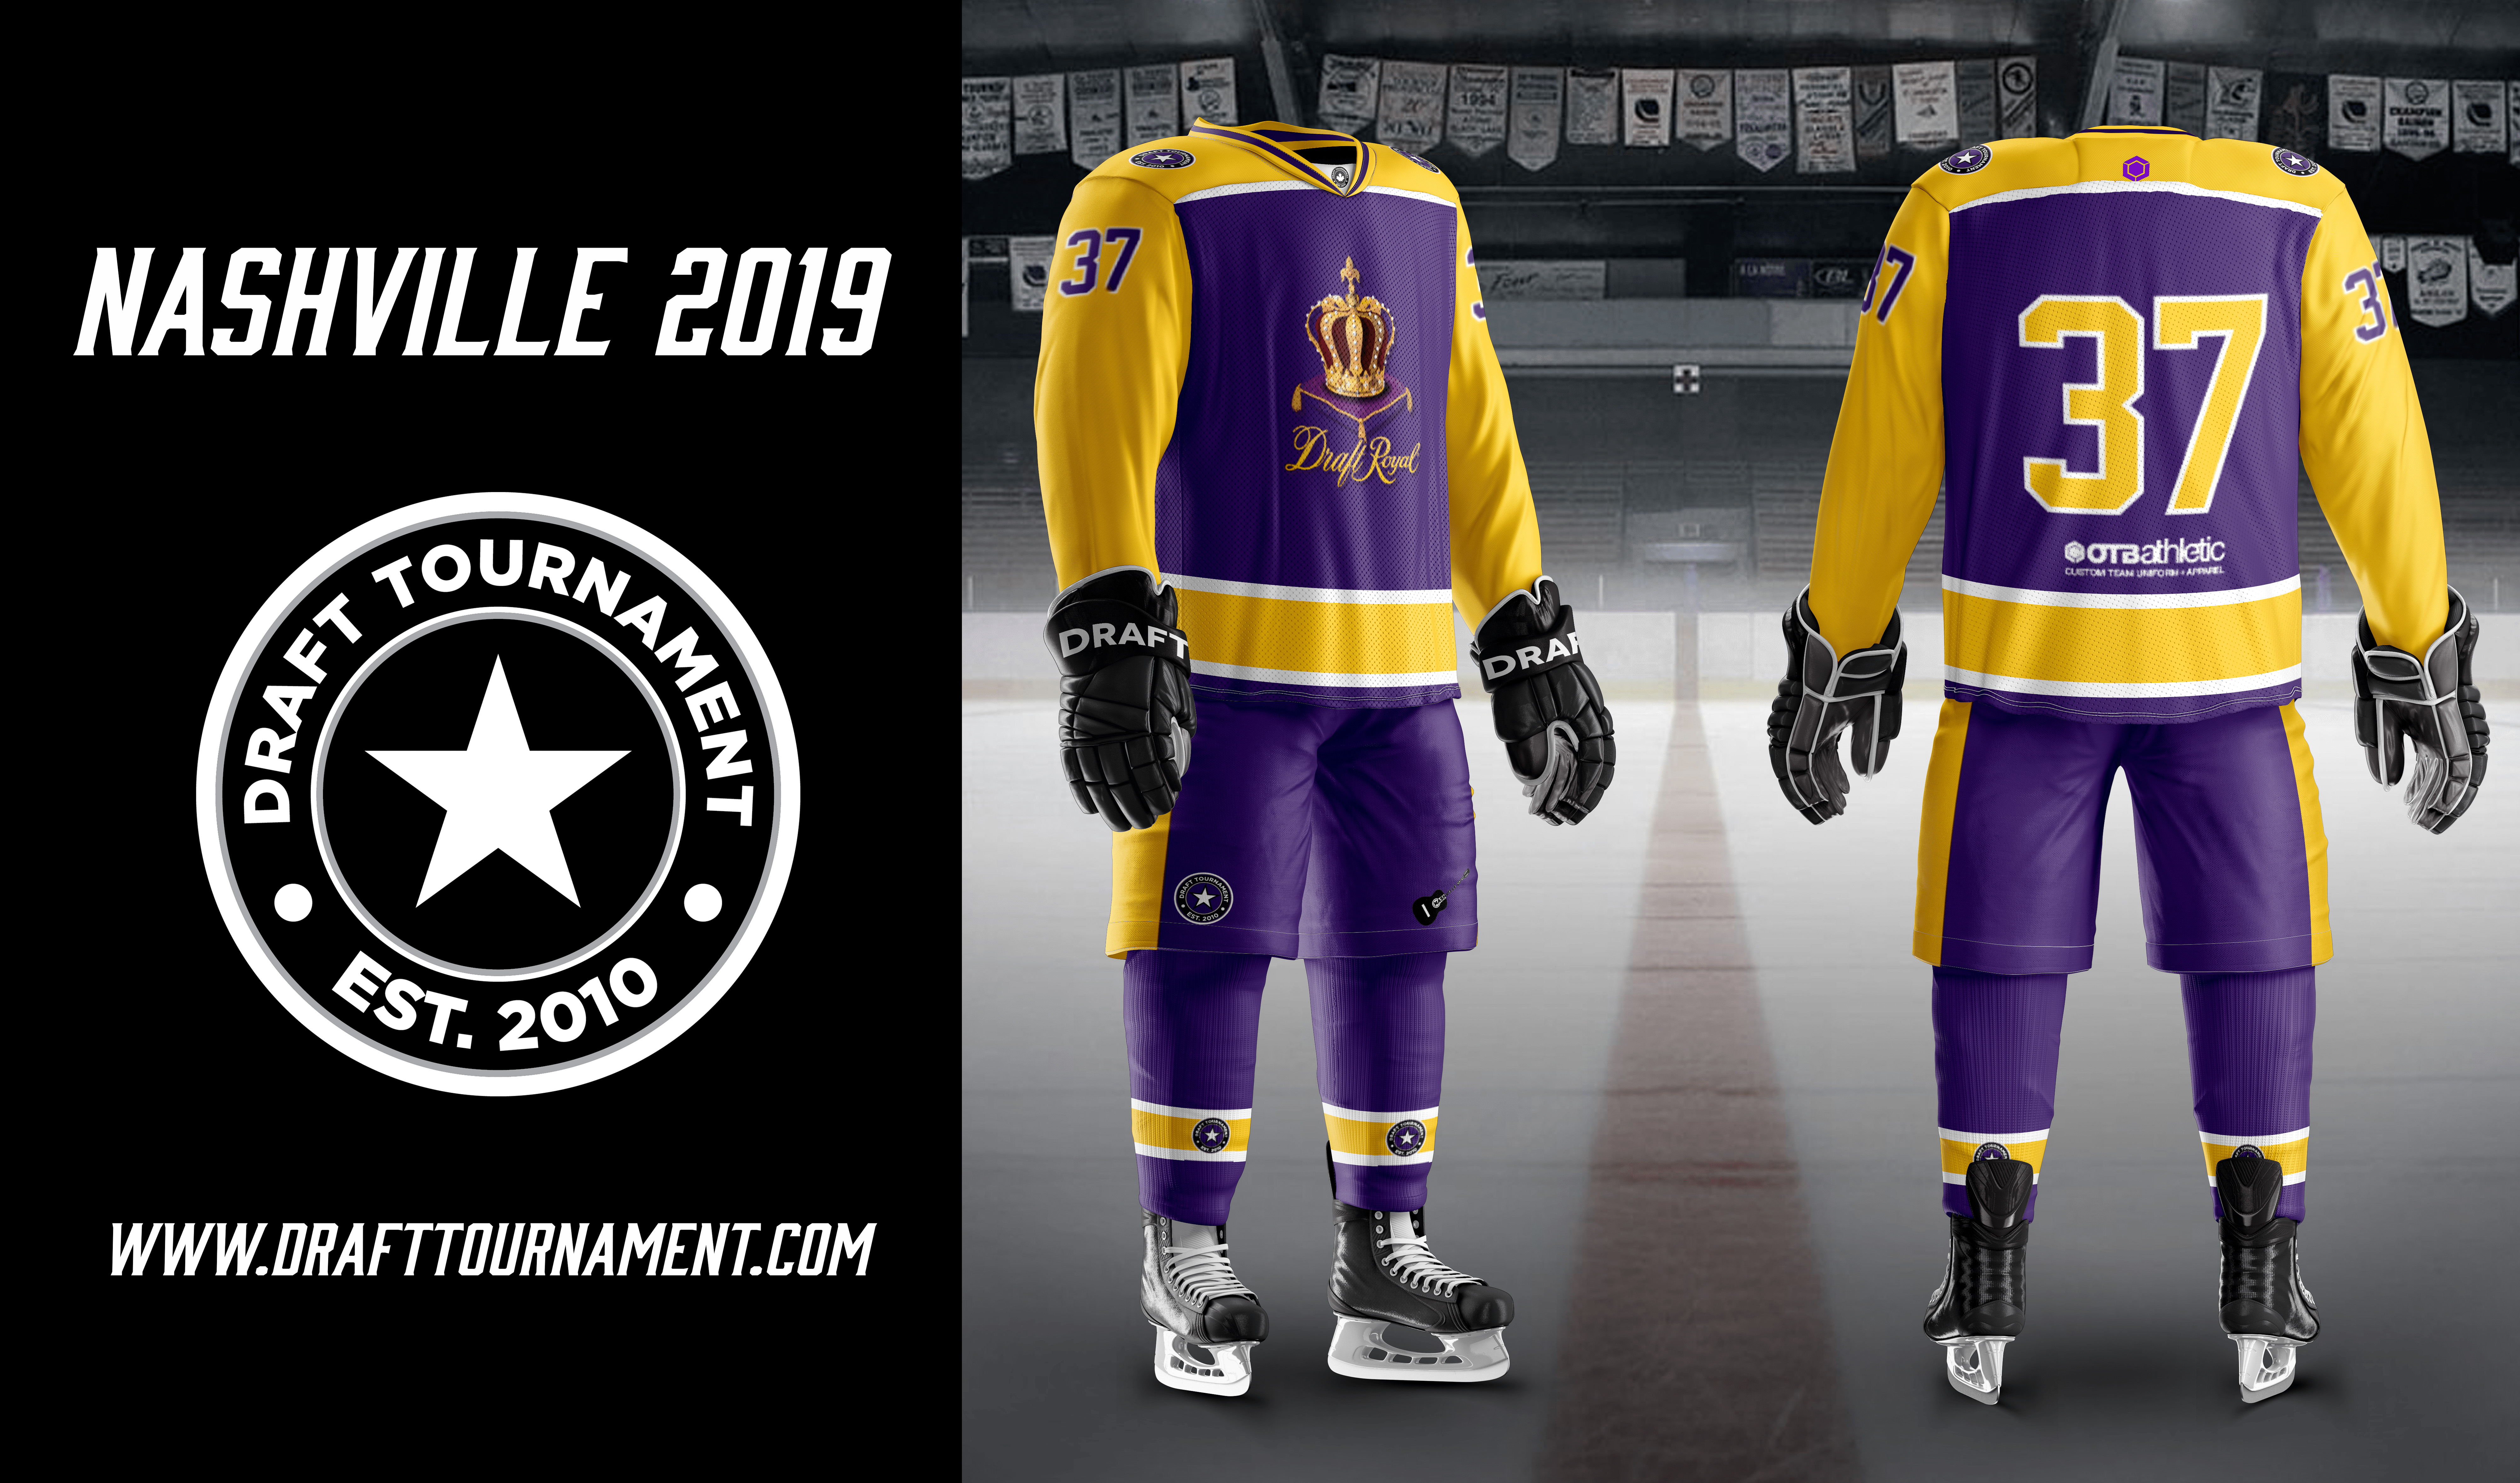 OFFICIAL BEER LEAGUE BEAUTY JERSEY - 5IVEHOLE